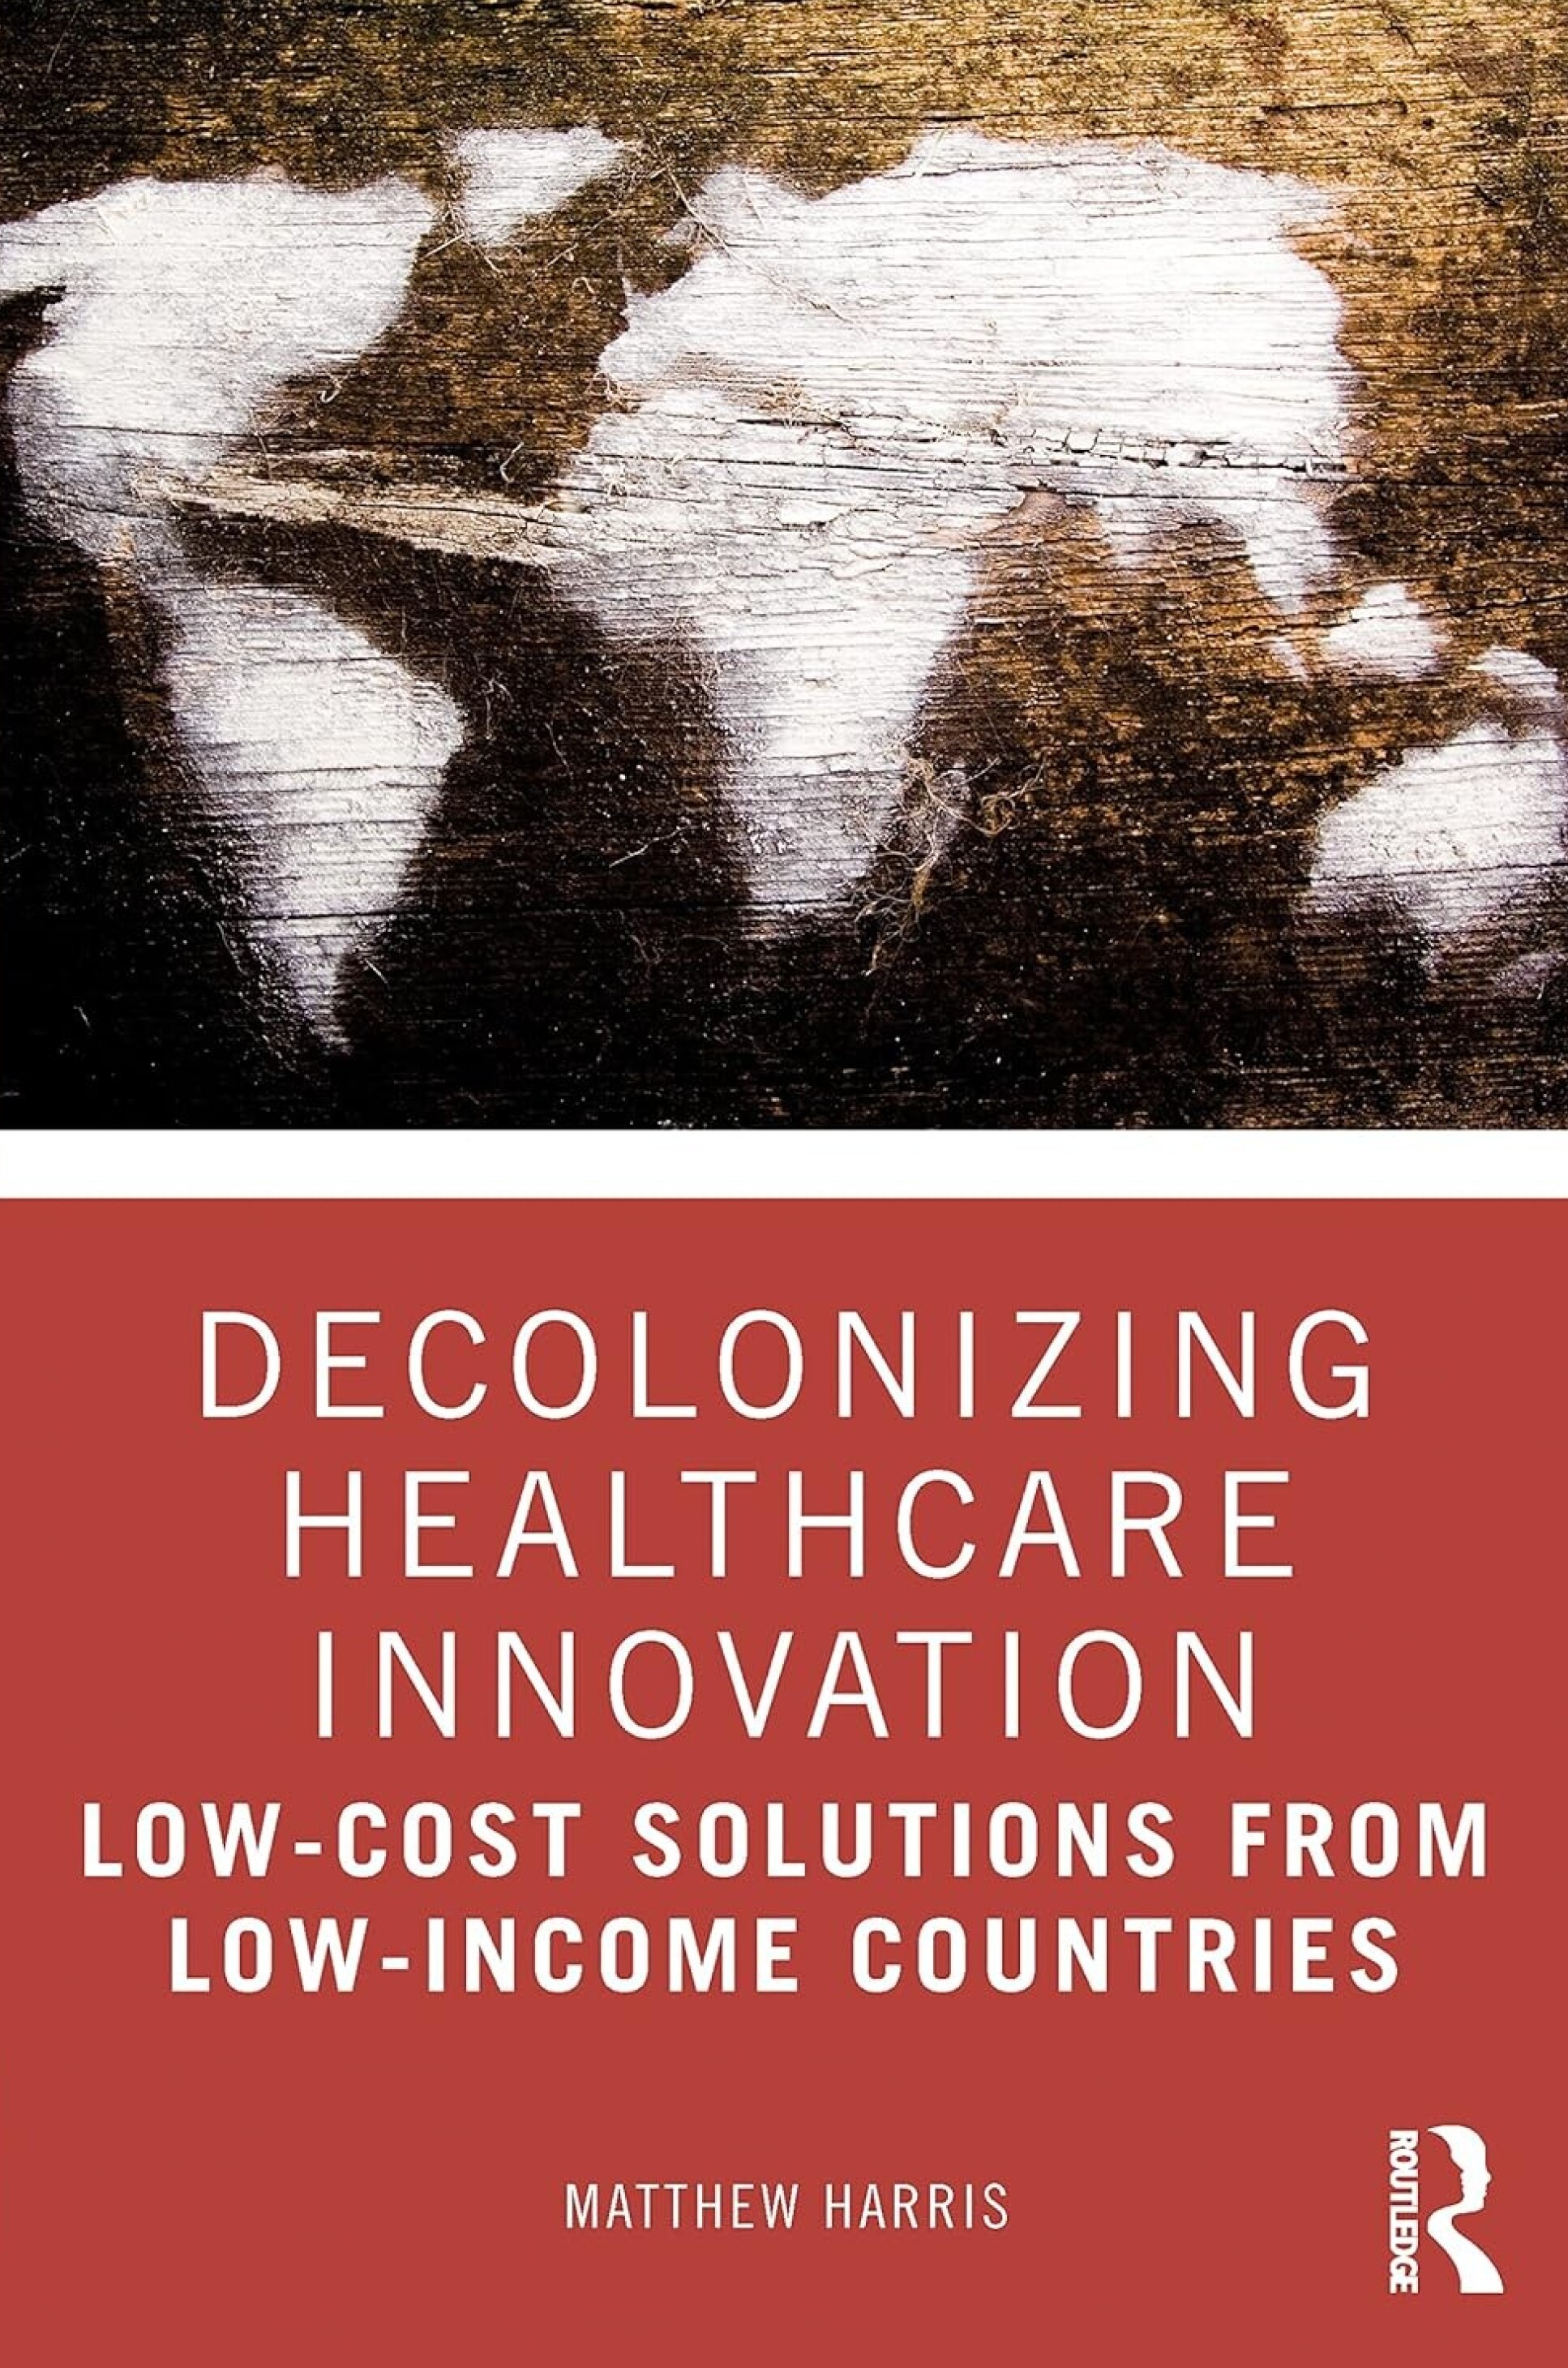 Front cover image of Decolonizing healthcare book